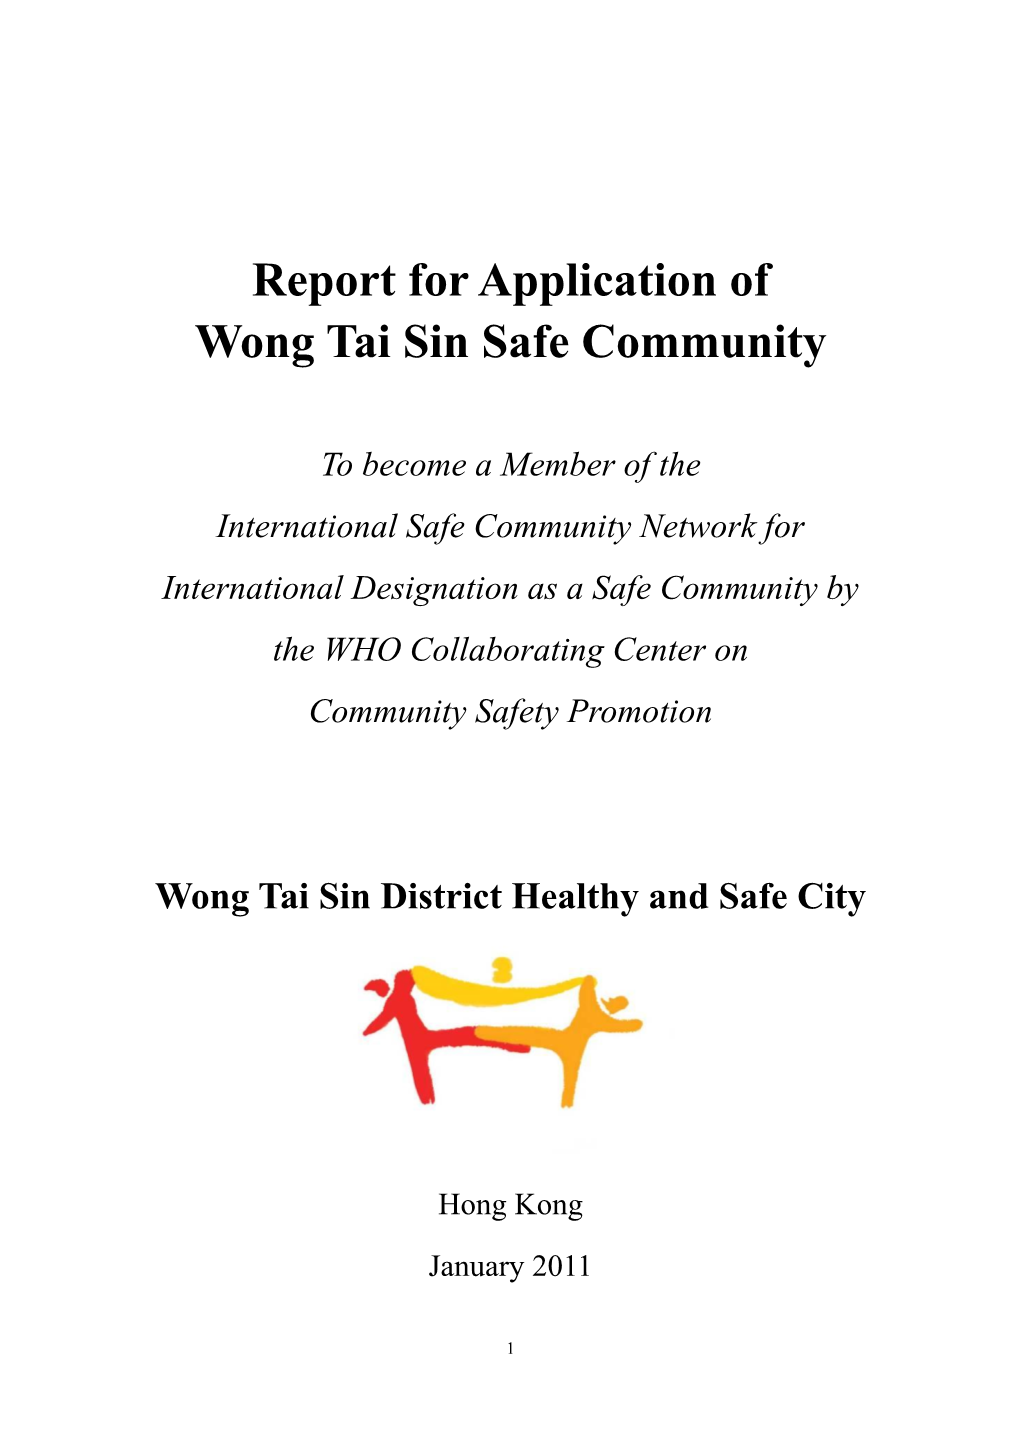 Report for Application of Wong Tai Sin Safe Community